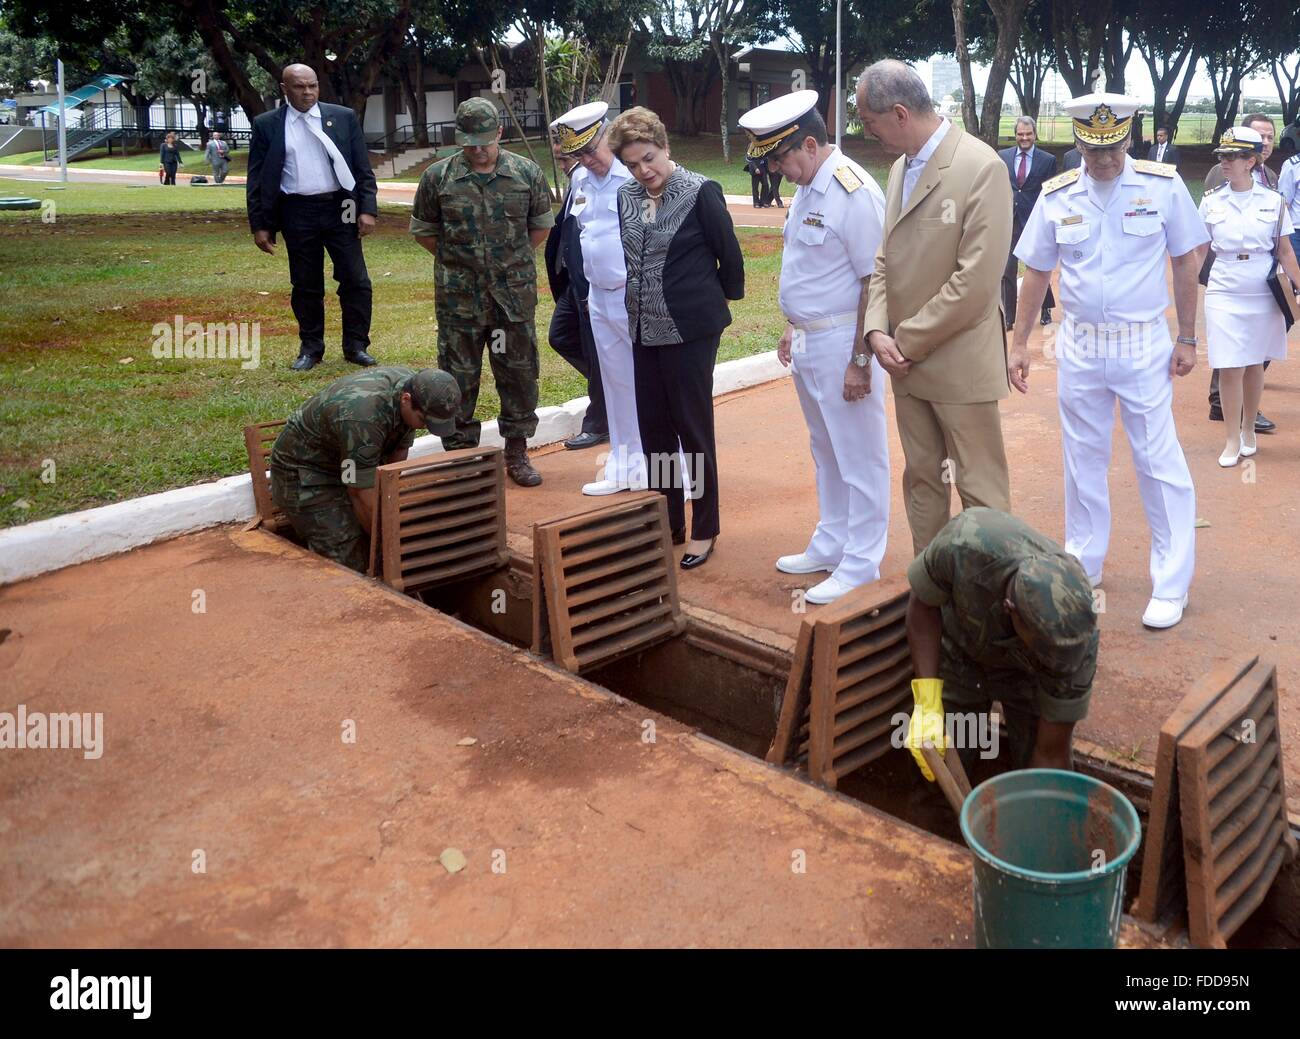 Brazil President Dilma Rousseff watches as sailors clean out storm drains at the Naval Headquarters to prevent breeding of aedes aegypti mosquitos during control efforts to halt the outbreak of Zika virus January 29, 2016 in Brasilia, Brazil. Stock Photo